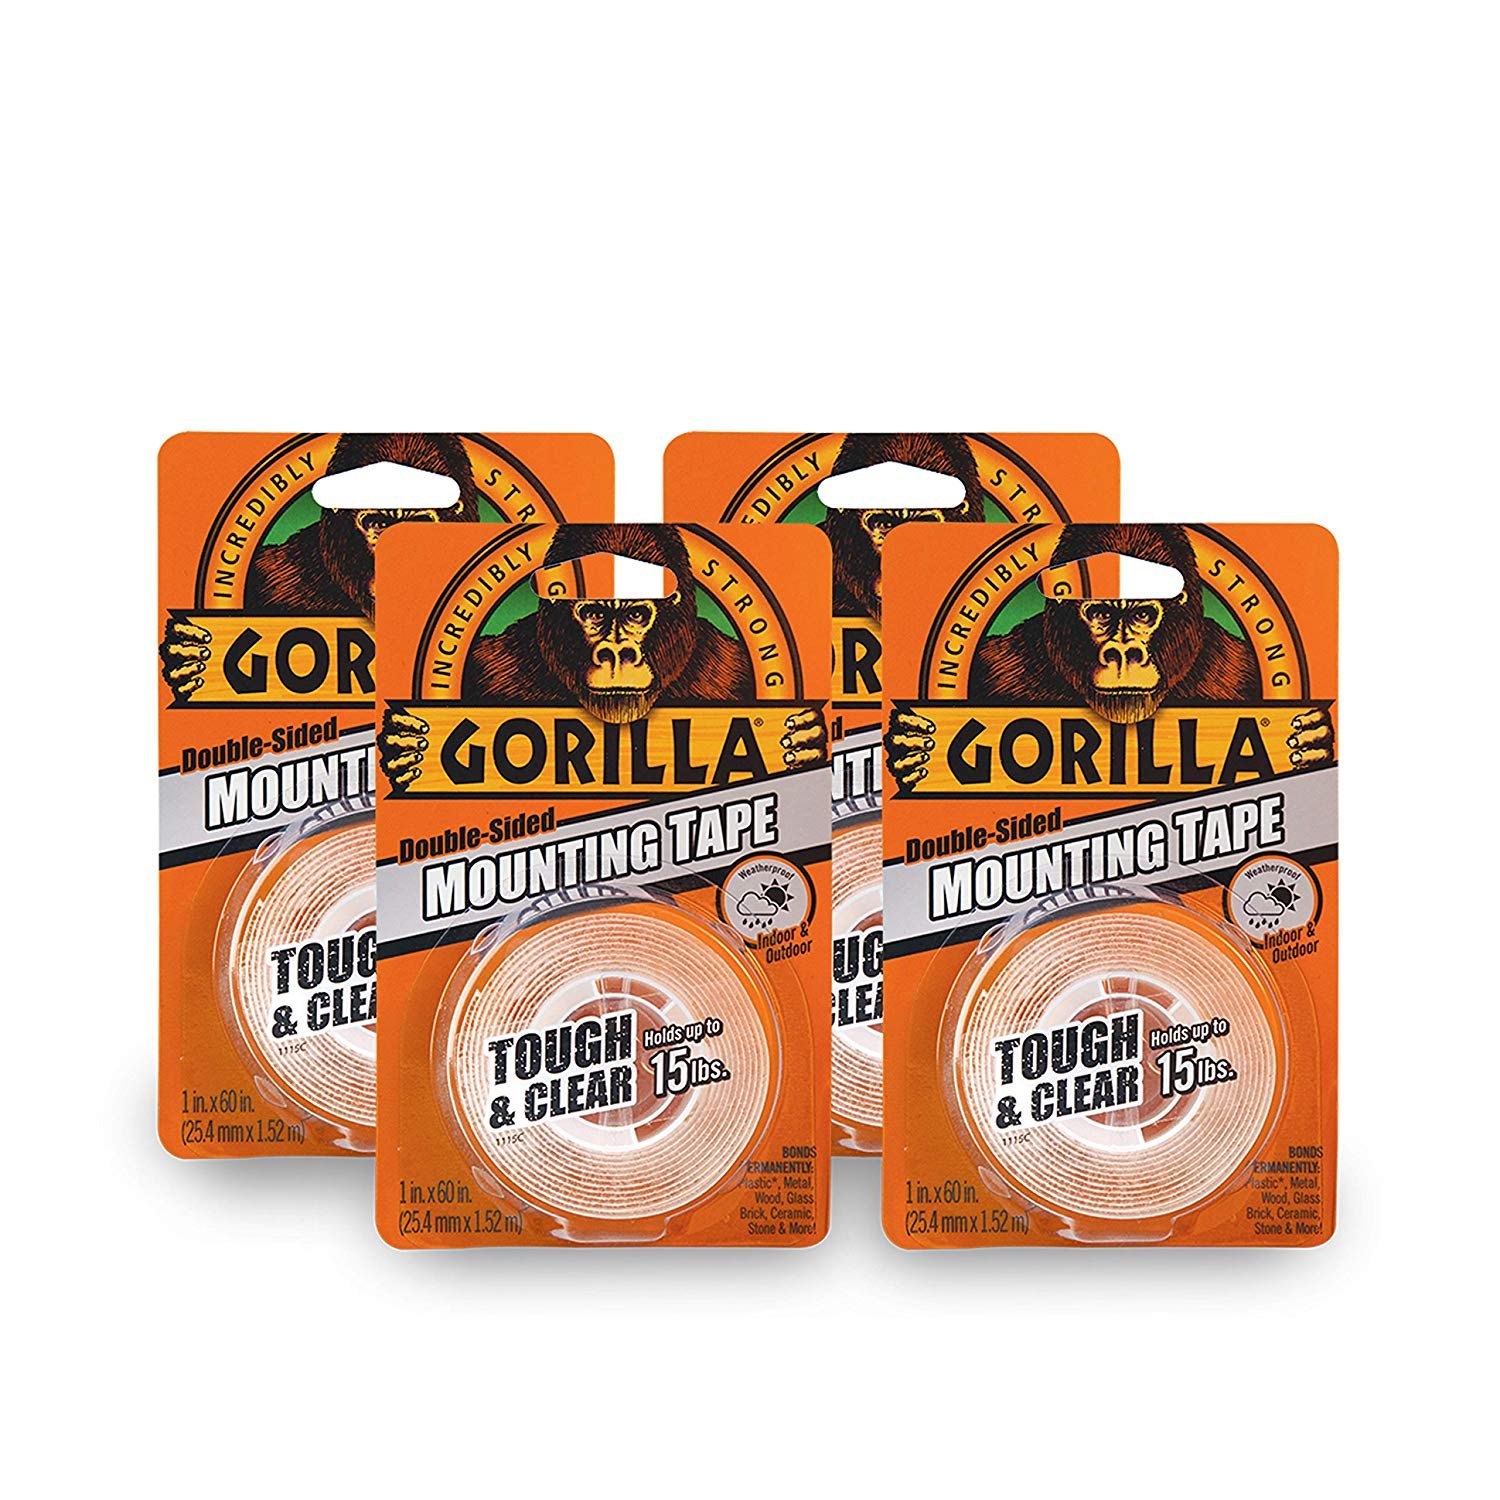 Gorilla Tough & Clear Double Sided Mounting Tape, 1 inch x 60 Inches, Clear, Pack of 4, Size: 4 Pack 6065003